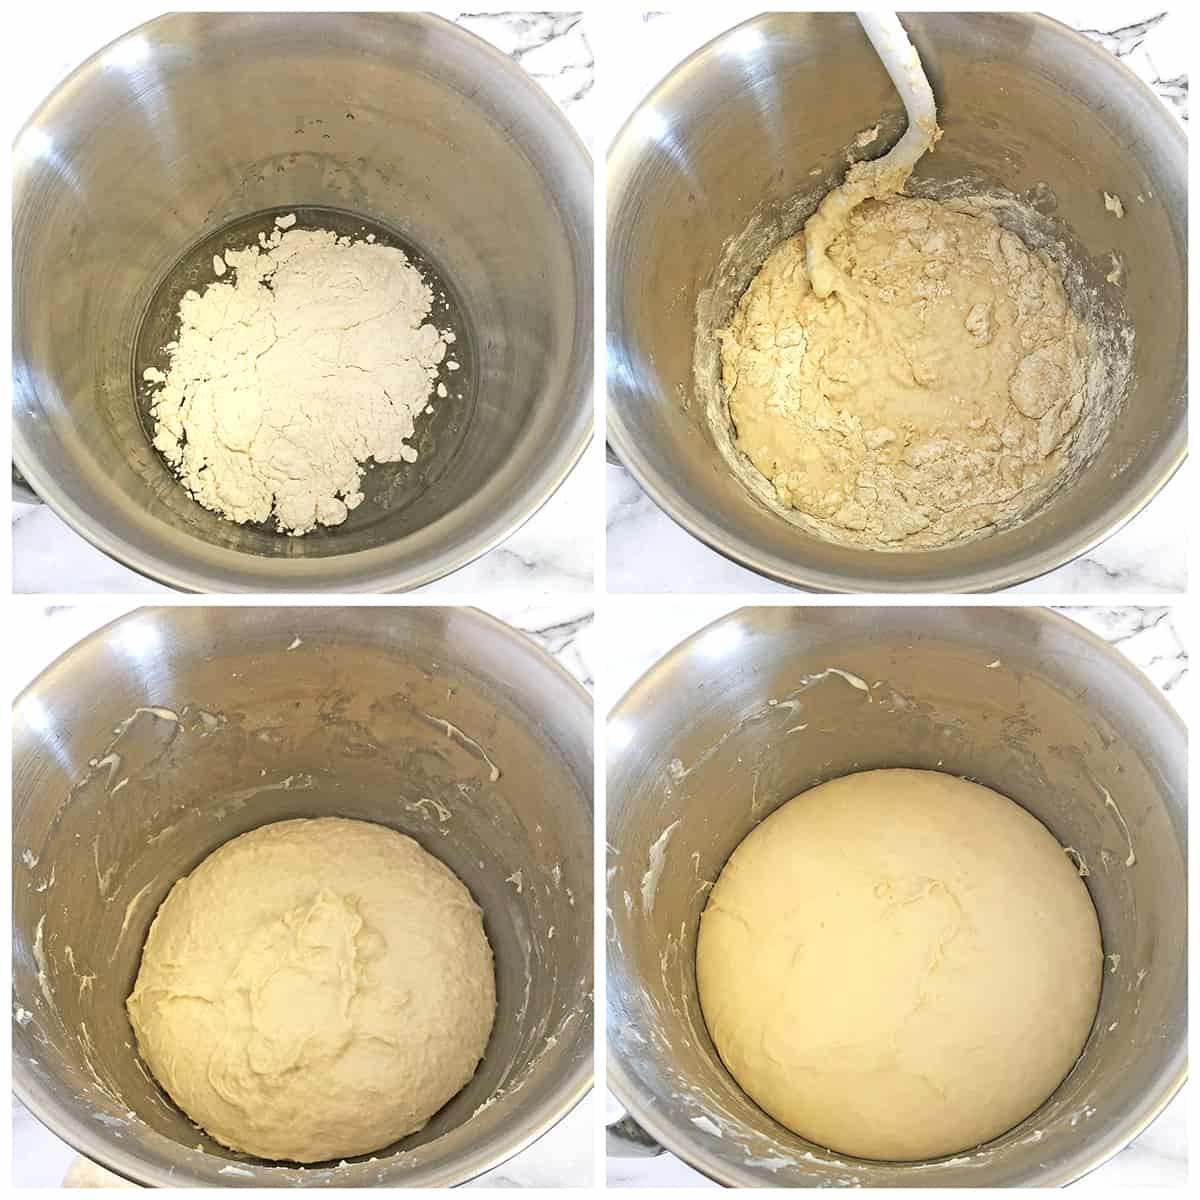 Place the dough in a warm place to rise for about 2 hours or until the dough triples in size.